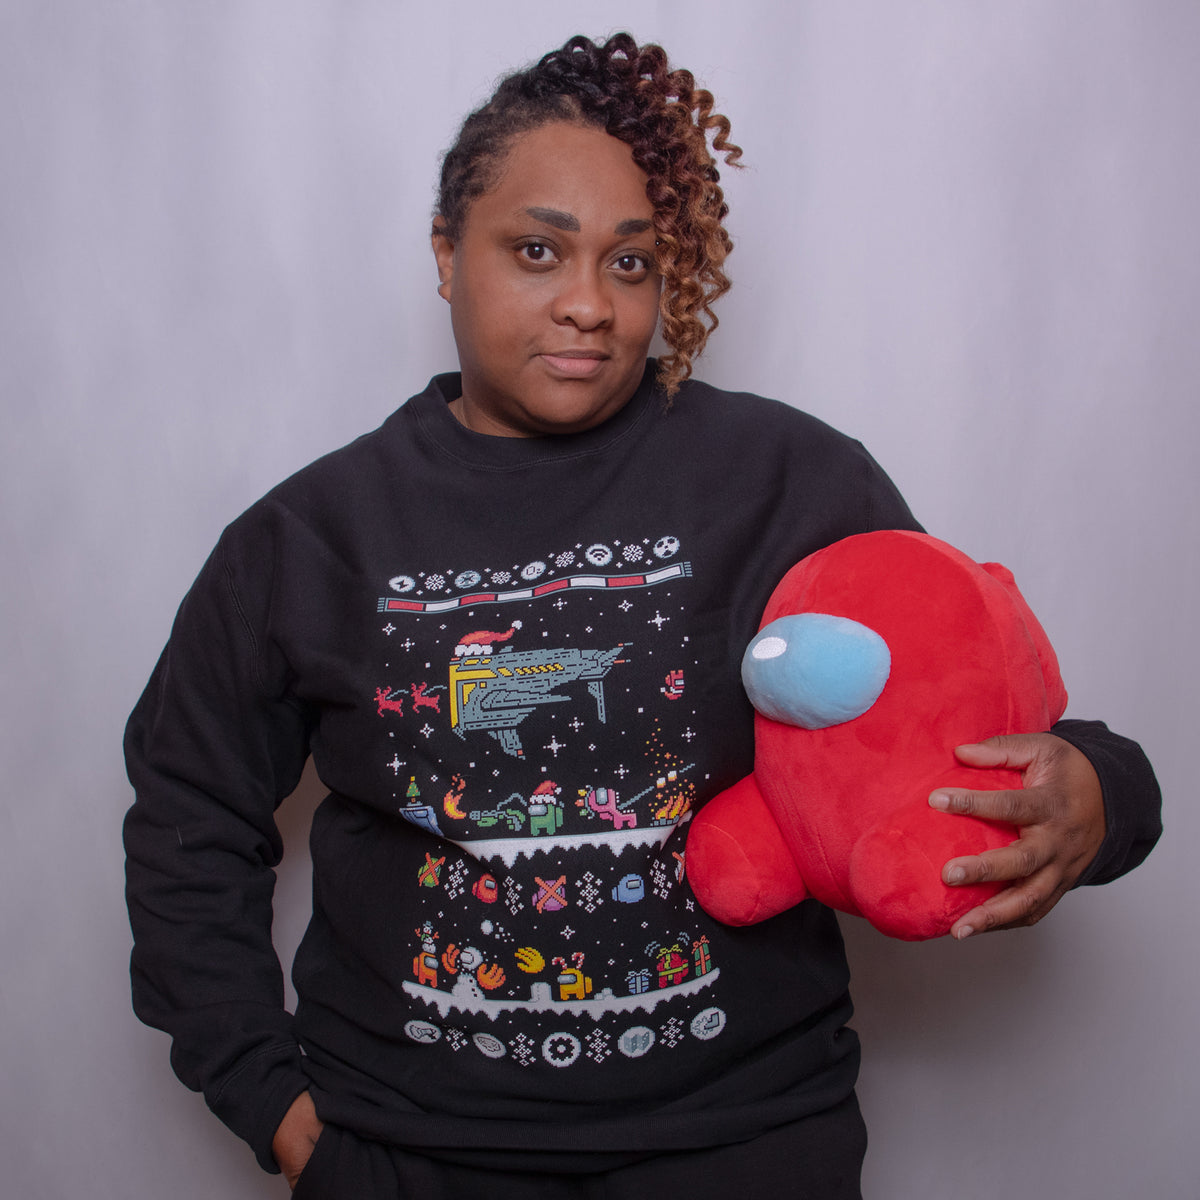 A photograph of a model wearing the Black Northern Hemisphere longsleeve sweatshirt holding a red Crewmate plush